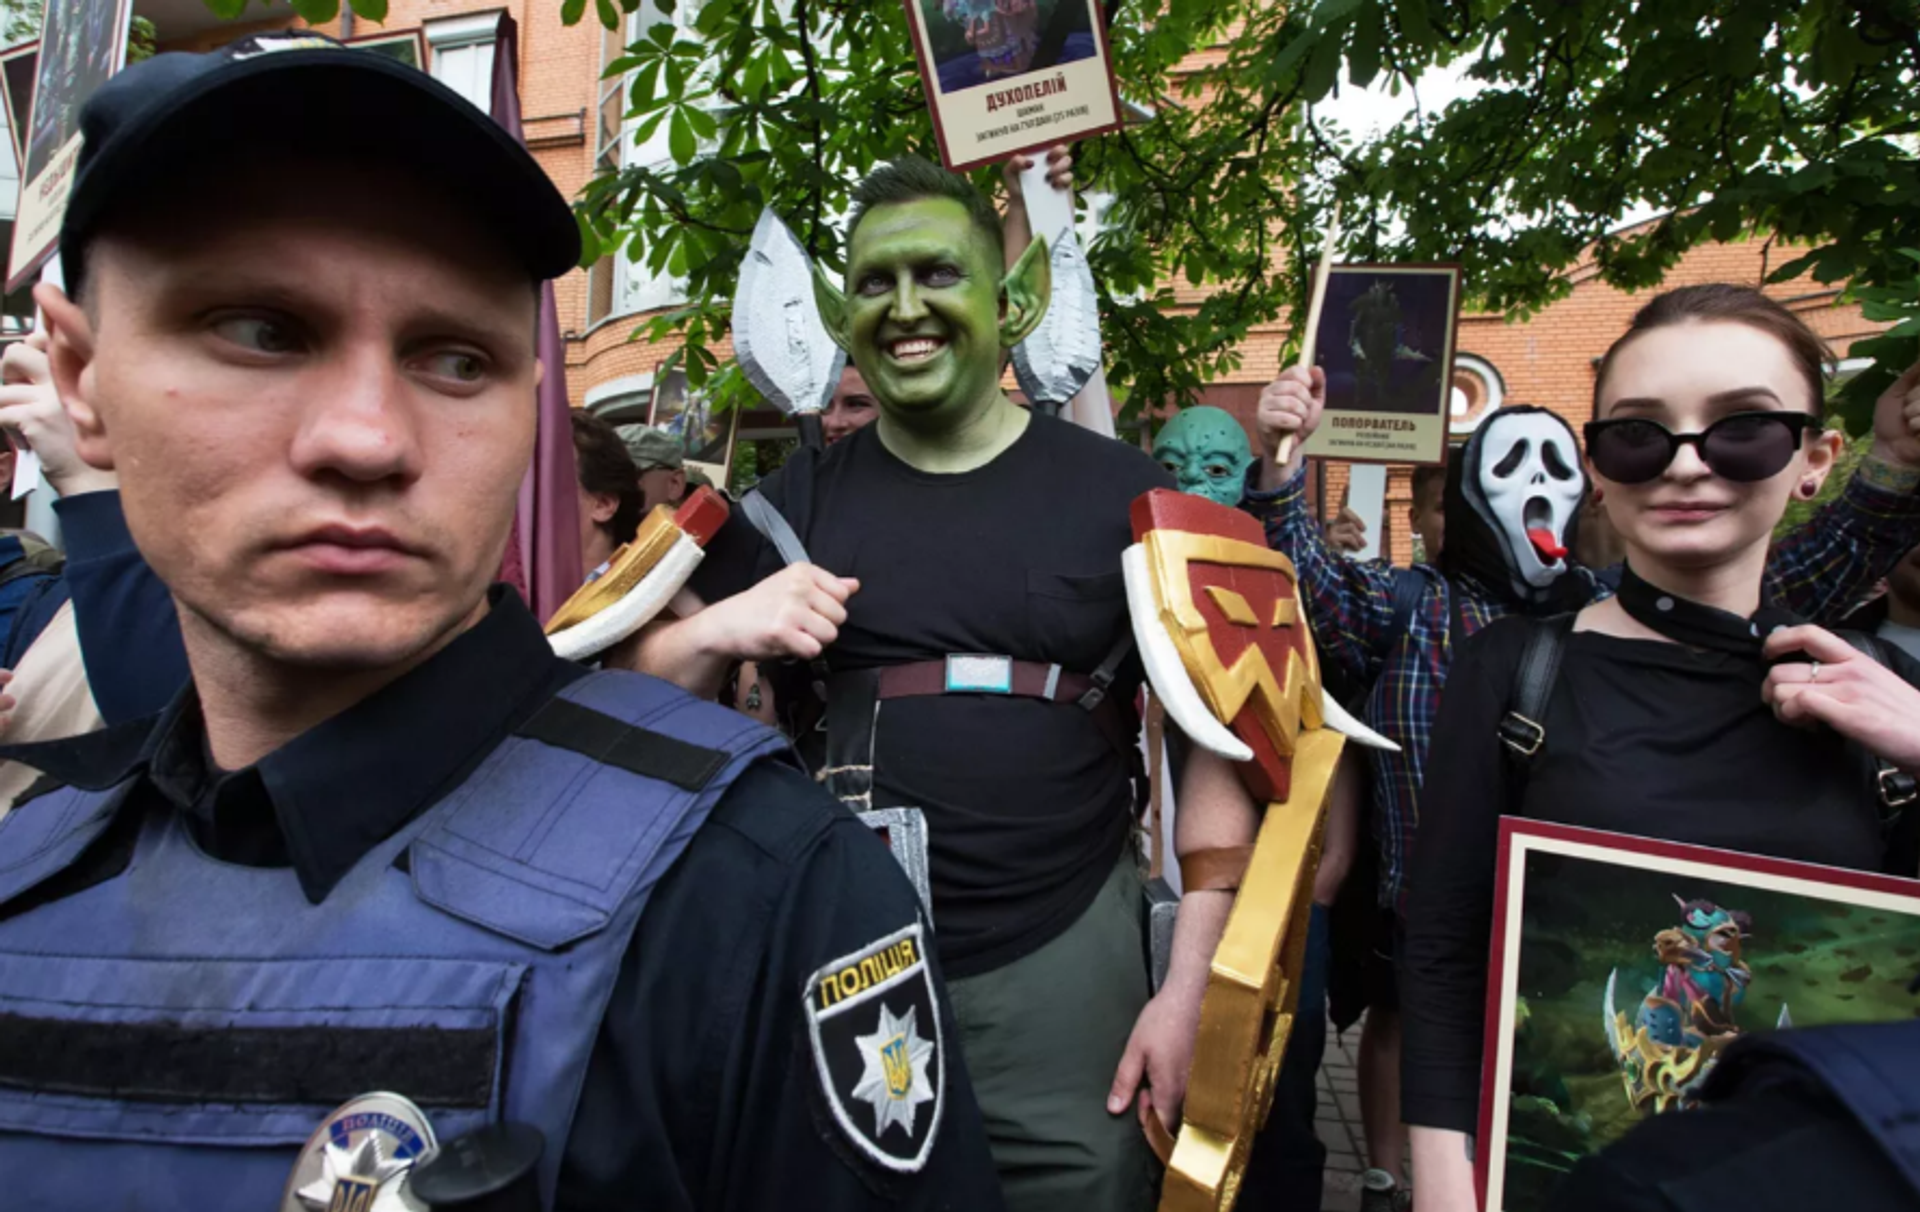 Flash mob participants hold portraits of characters from the computer game World of Warcraft in Kiev, where the 2018 Immortal Regiment rally took place. - Sputnik International, 1920, 14.05.2022